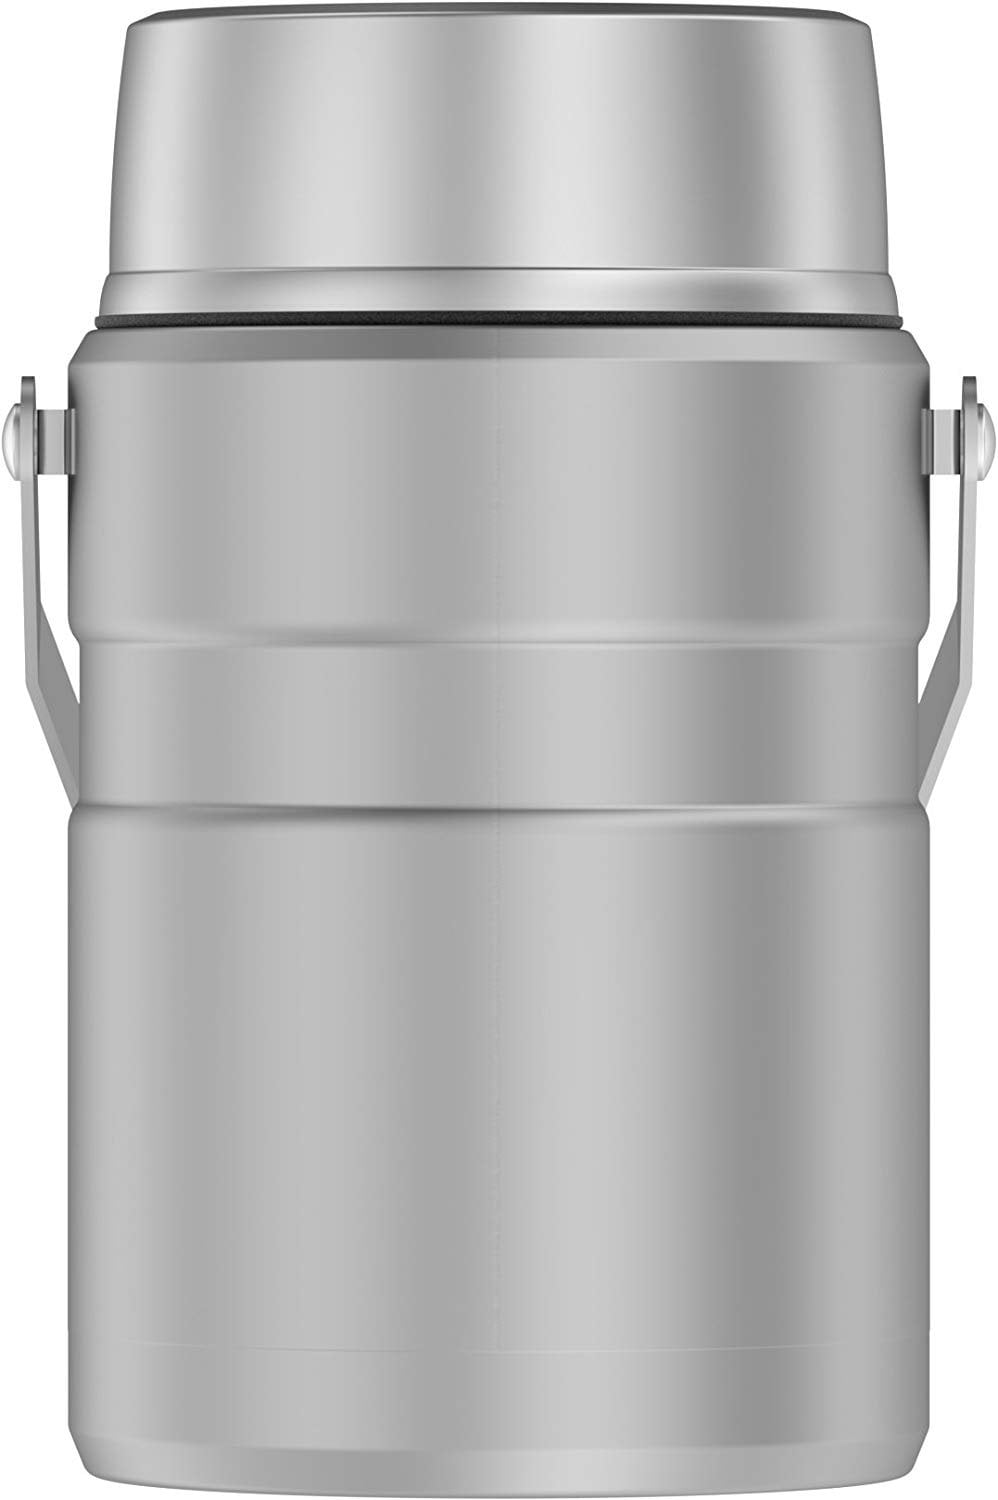 Thermos Insulated Food Jars 12 oz bundle - general for sale - by owner -  craigslist